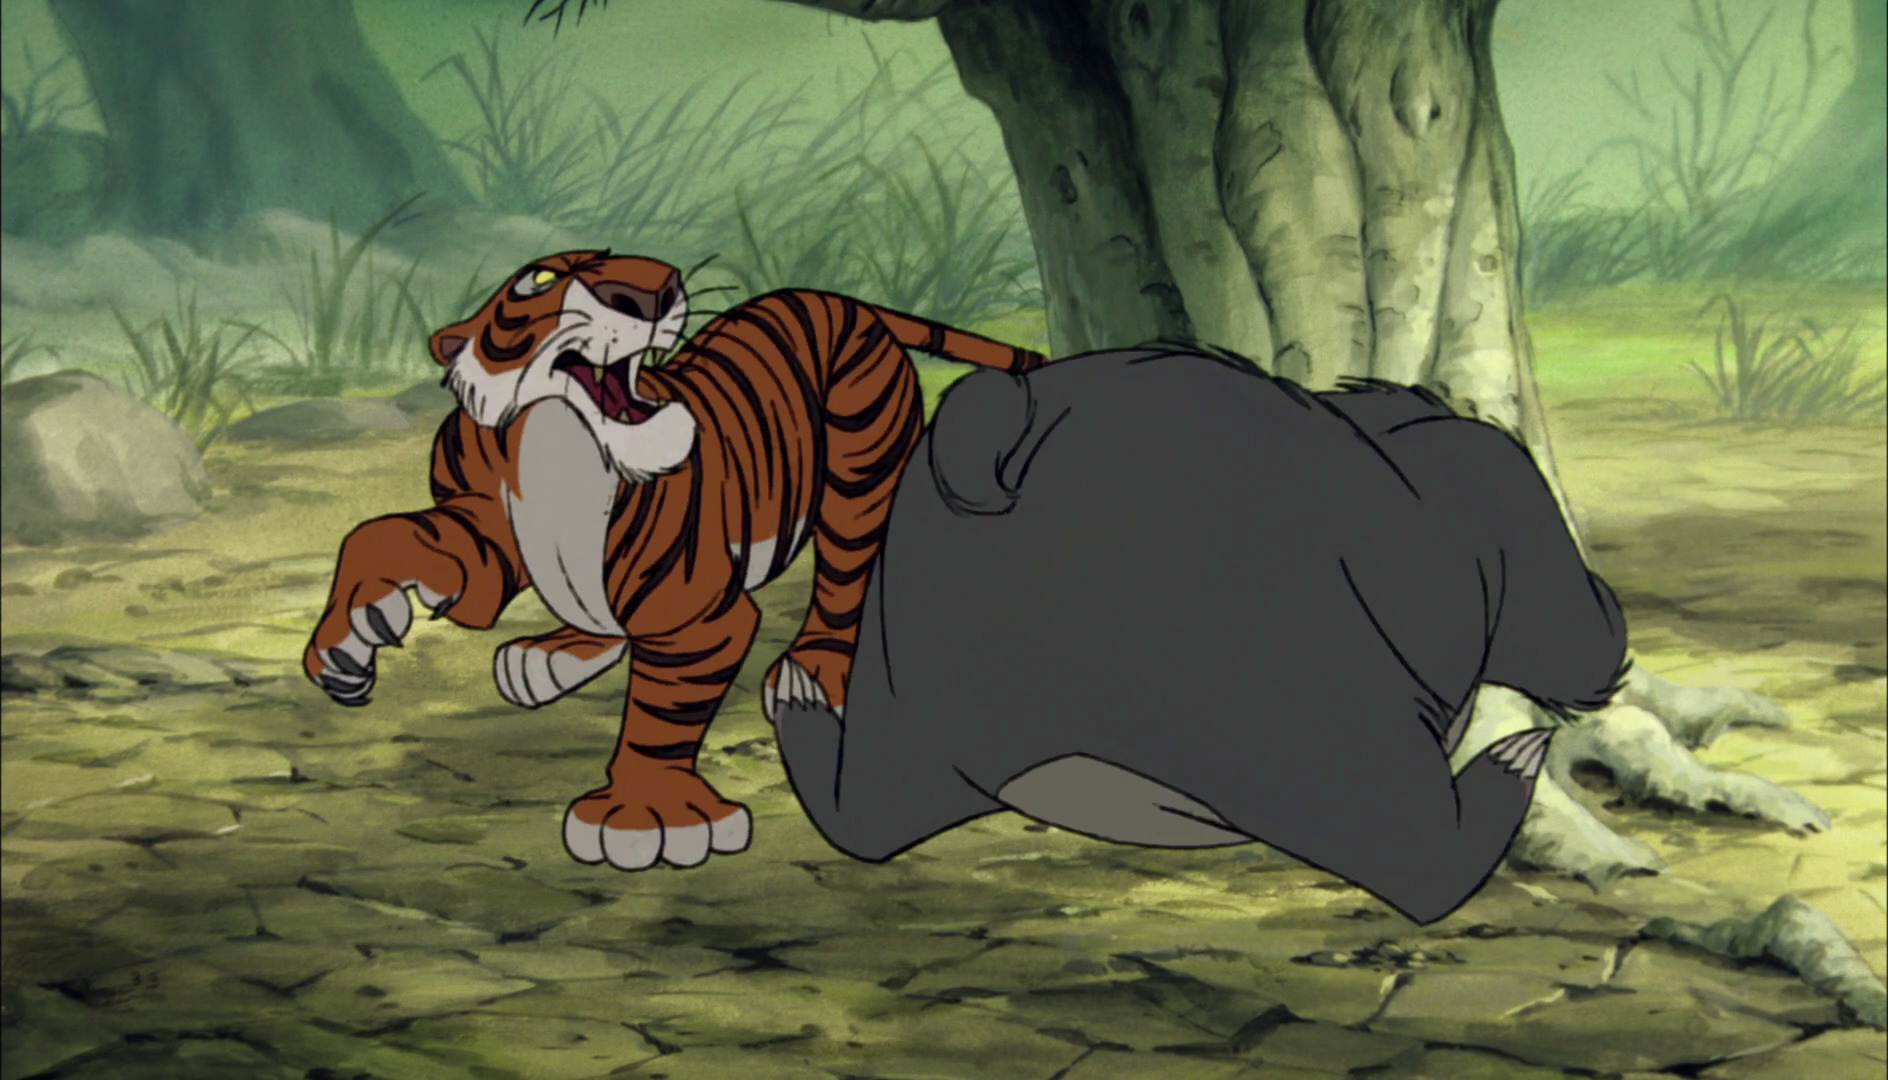 Baloo the bear and Shere Khan the Tiger both got caught by the tree